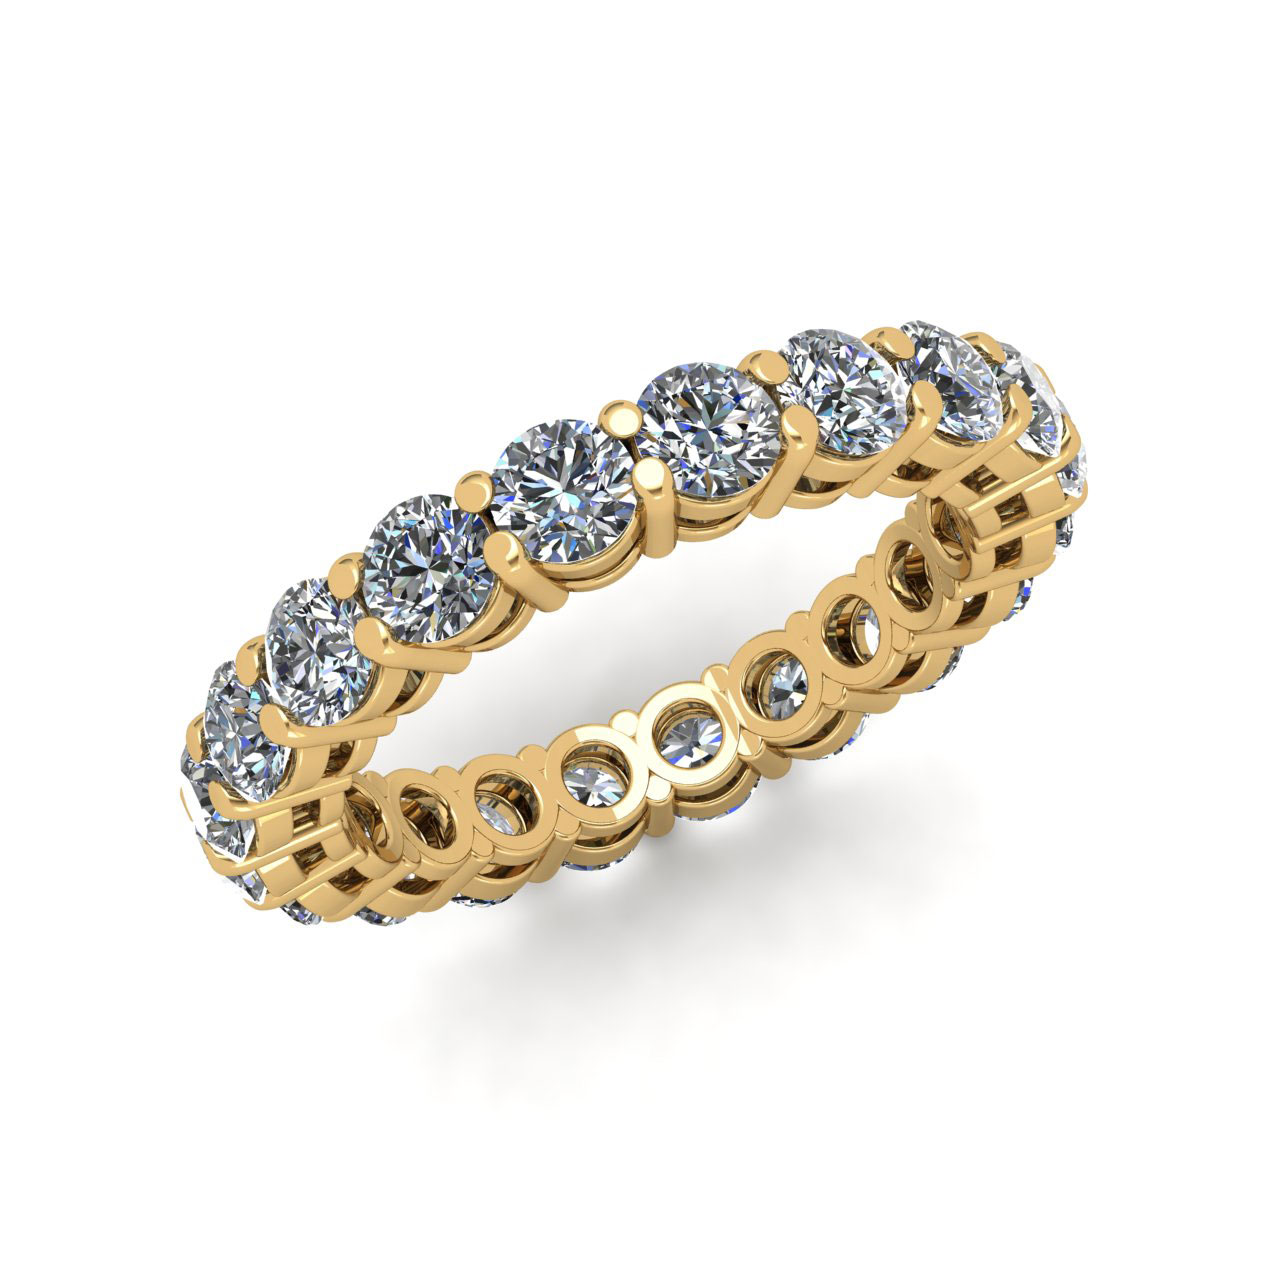 Jewel We Sell Natural 3.00Ct Round Diamond Shared Prong Gallery Ladies Anniversary Wedding Eternity Band Ring Solid 18k Yellow Gold G SI1